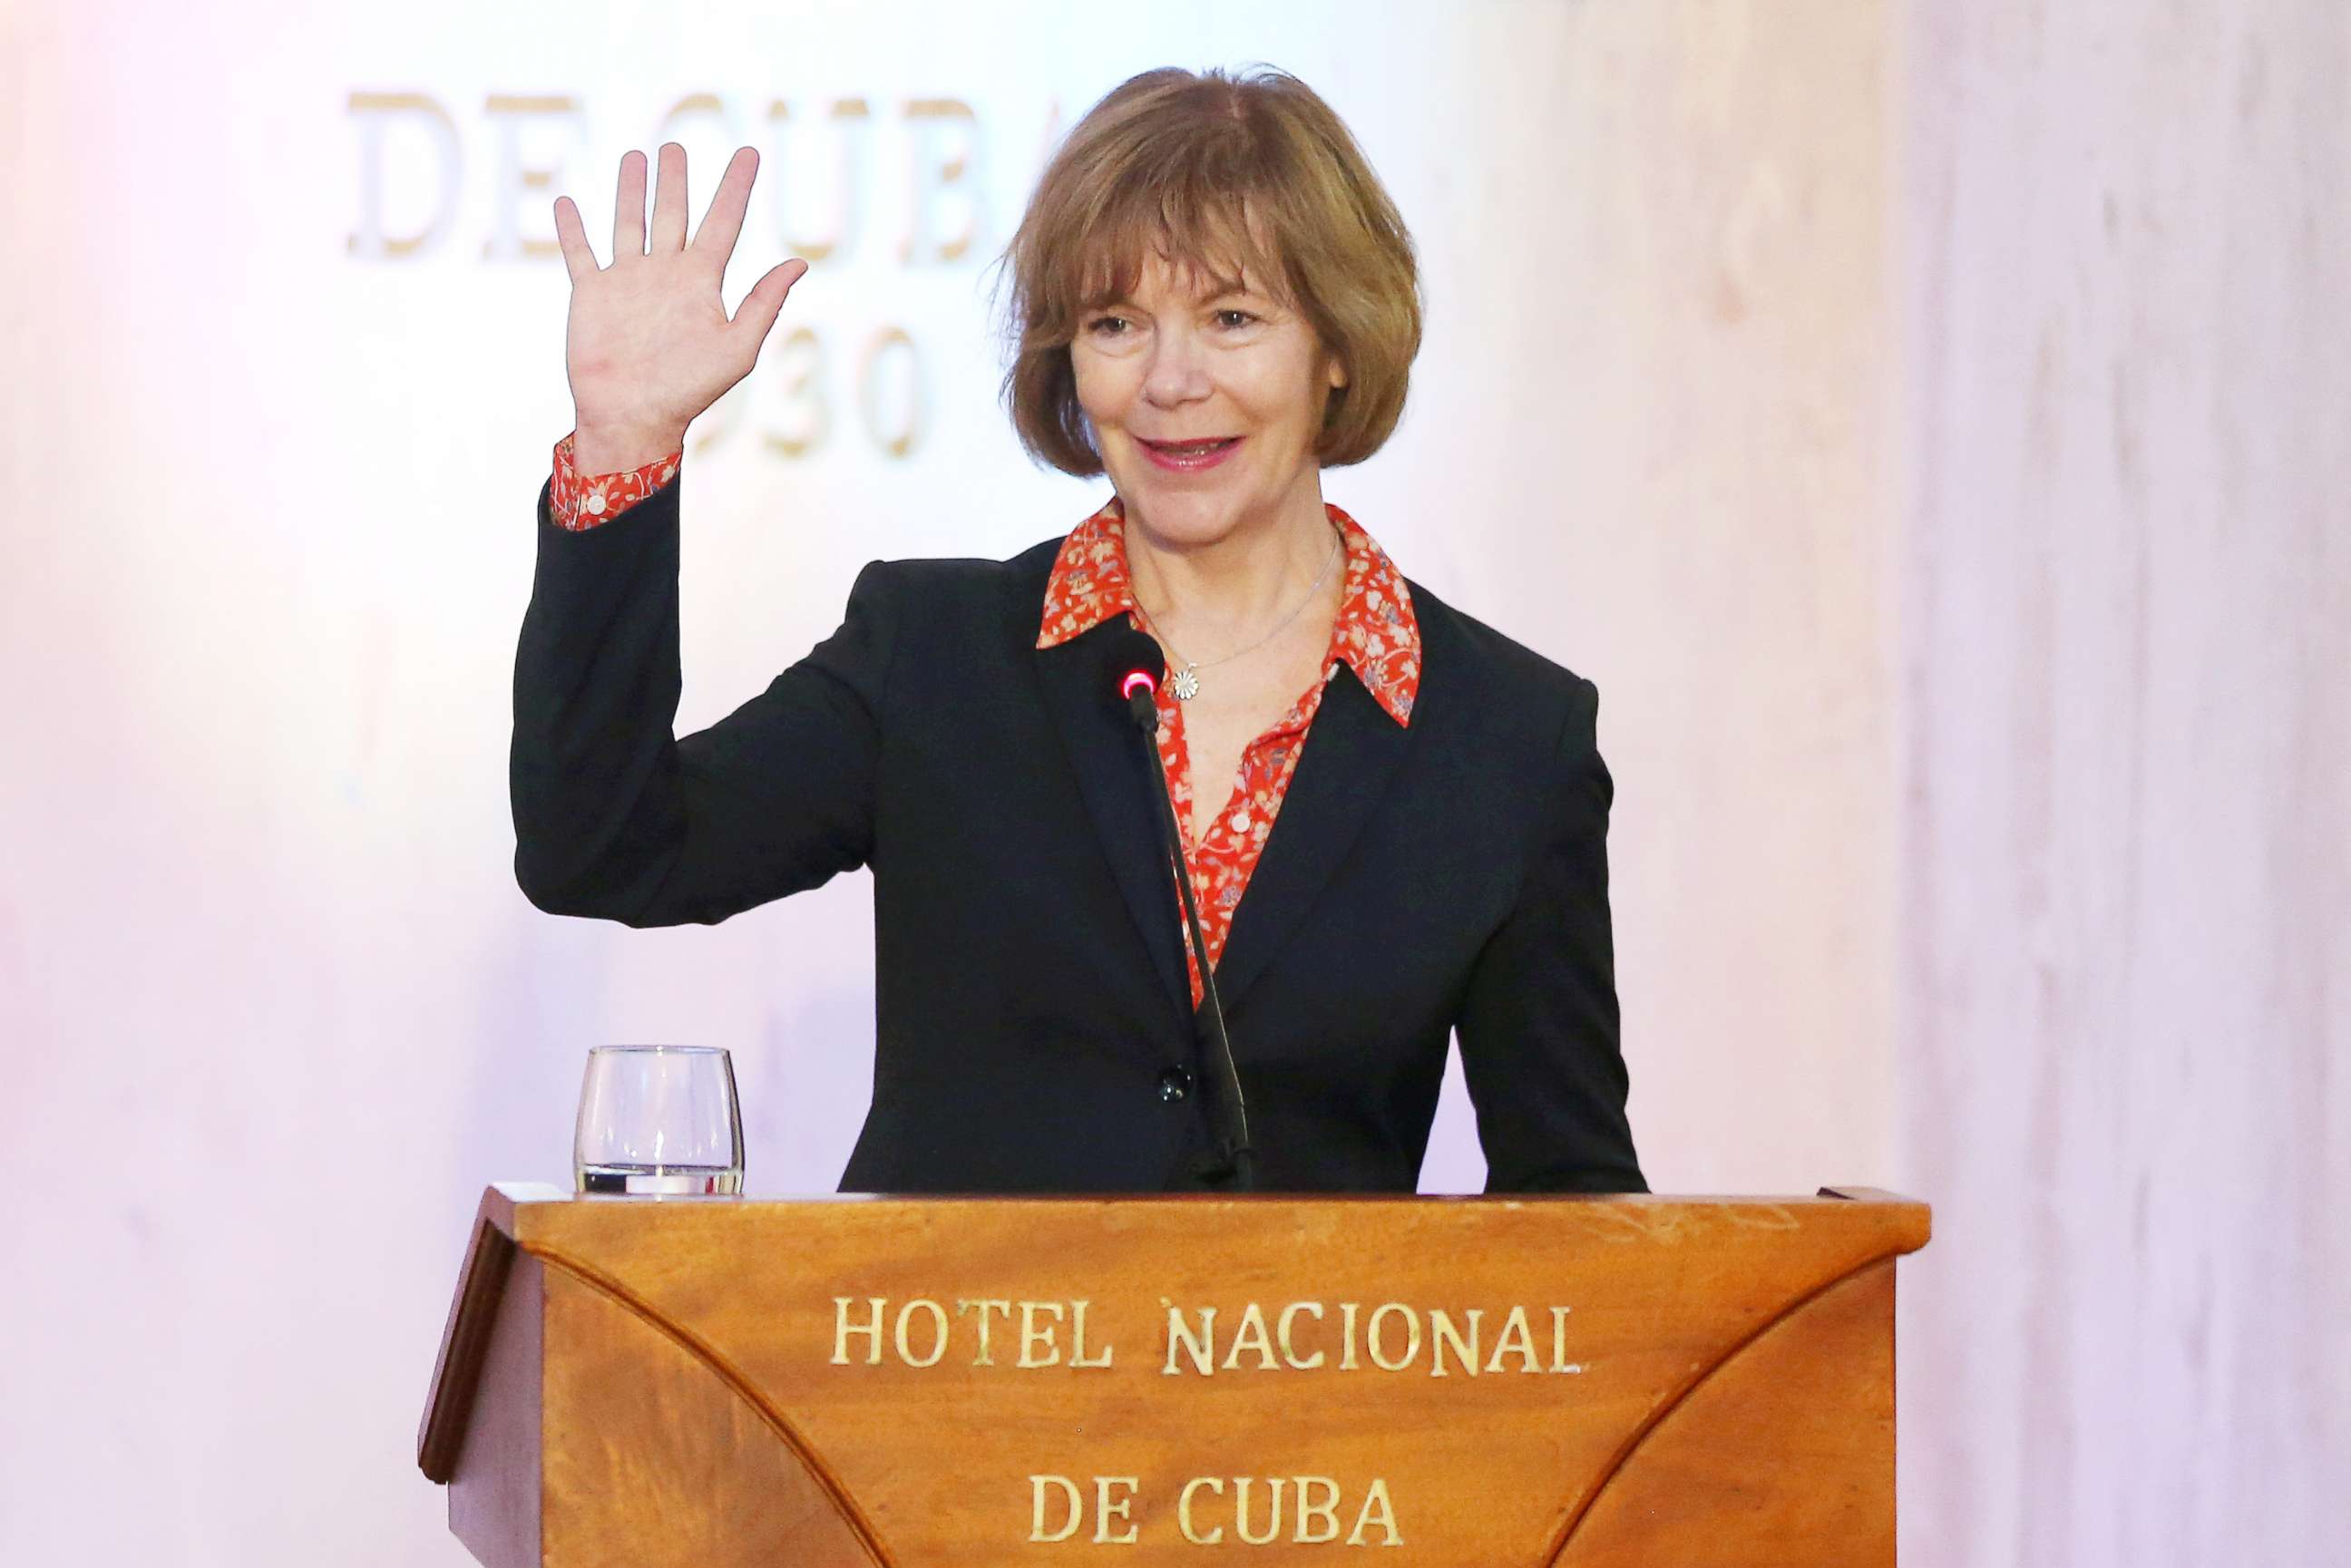 PHOTO: In this file photo, Minnesota Lt. Governor Tina Smith waves to journalists at the end of a news conference in Havana, June 22, 2017.  